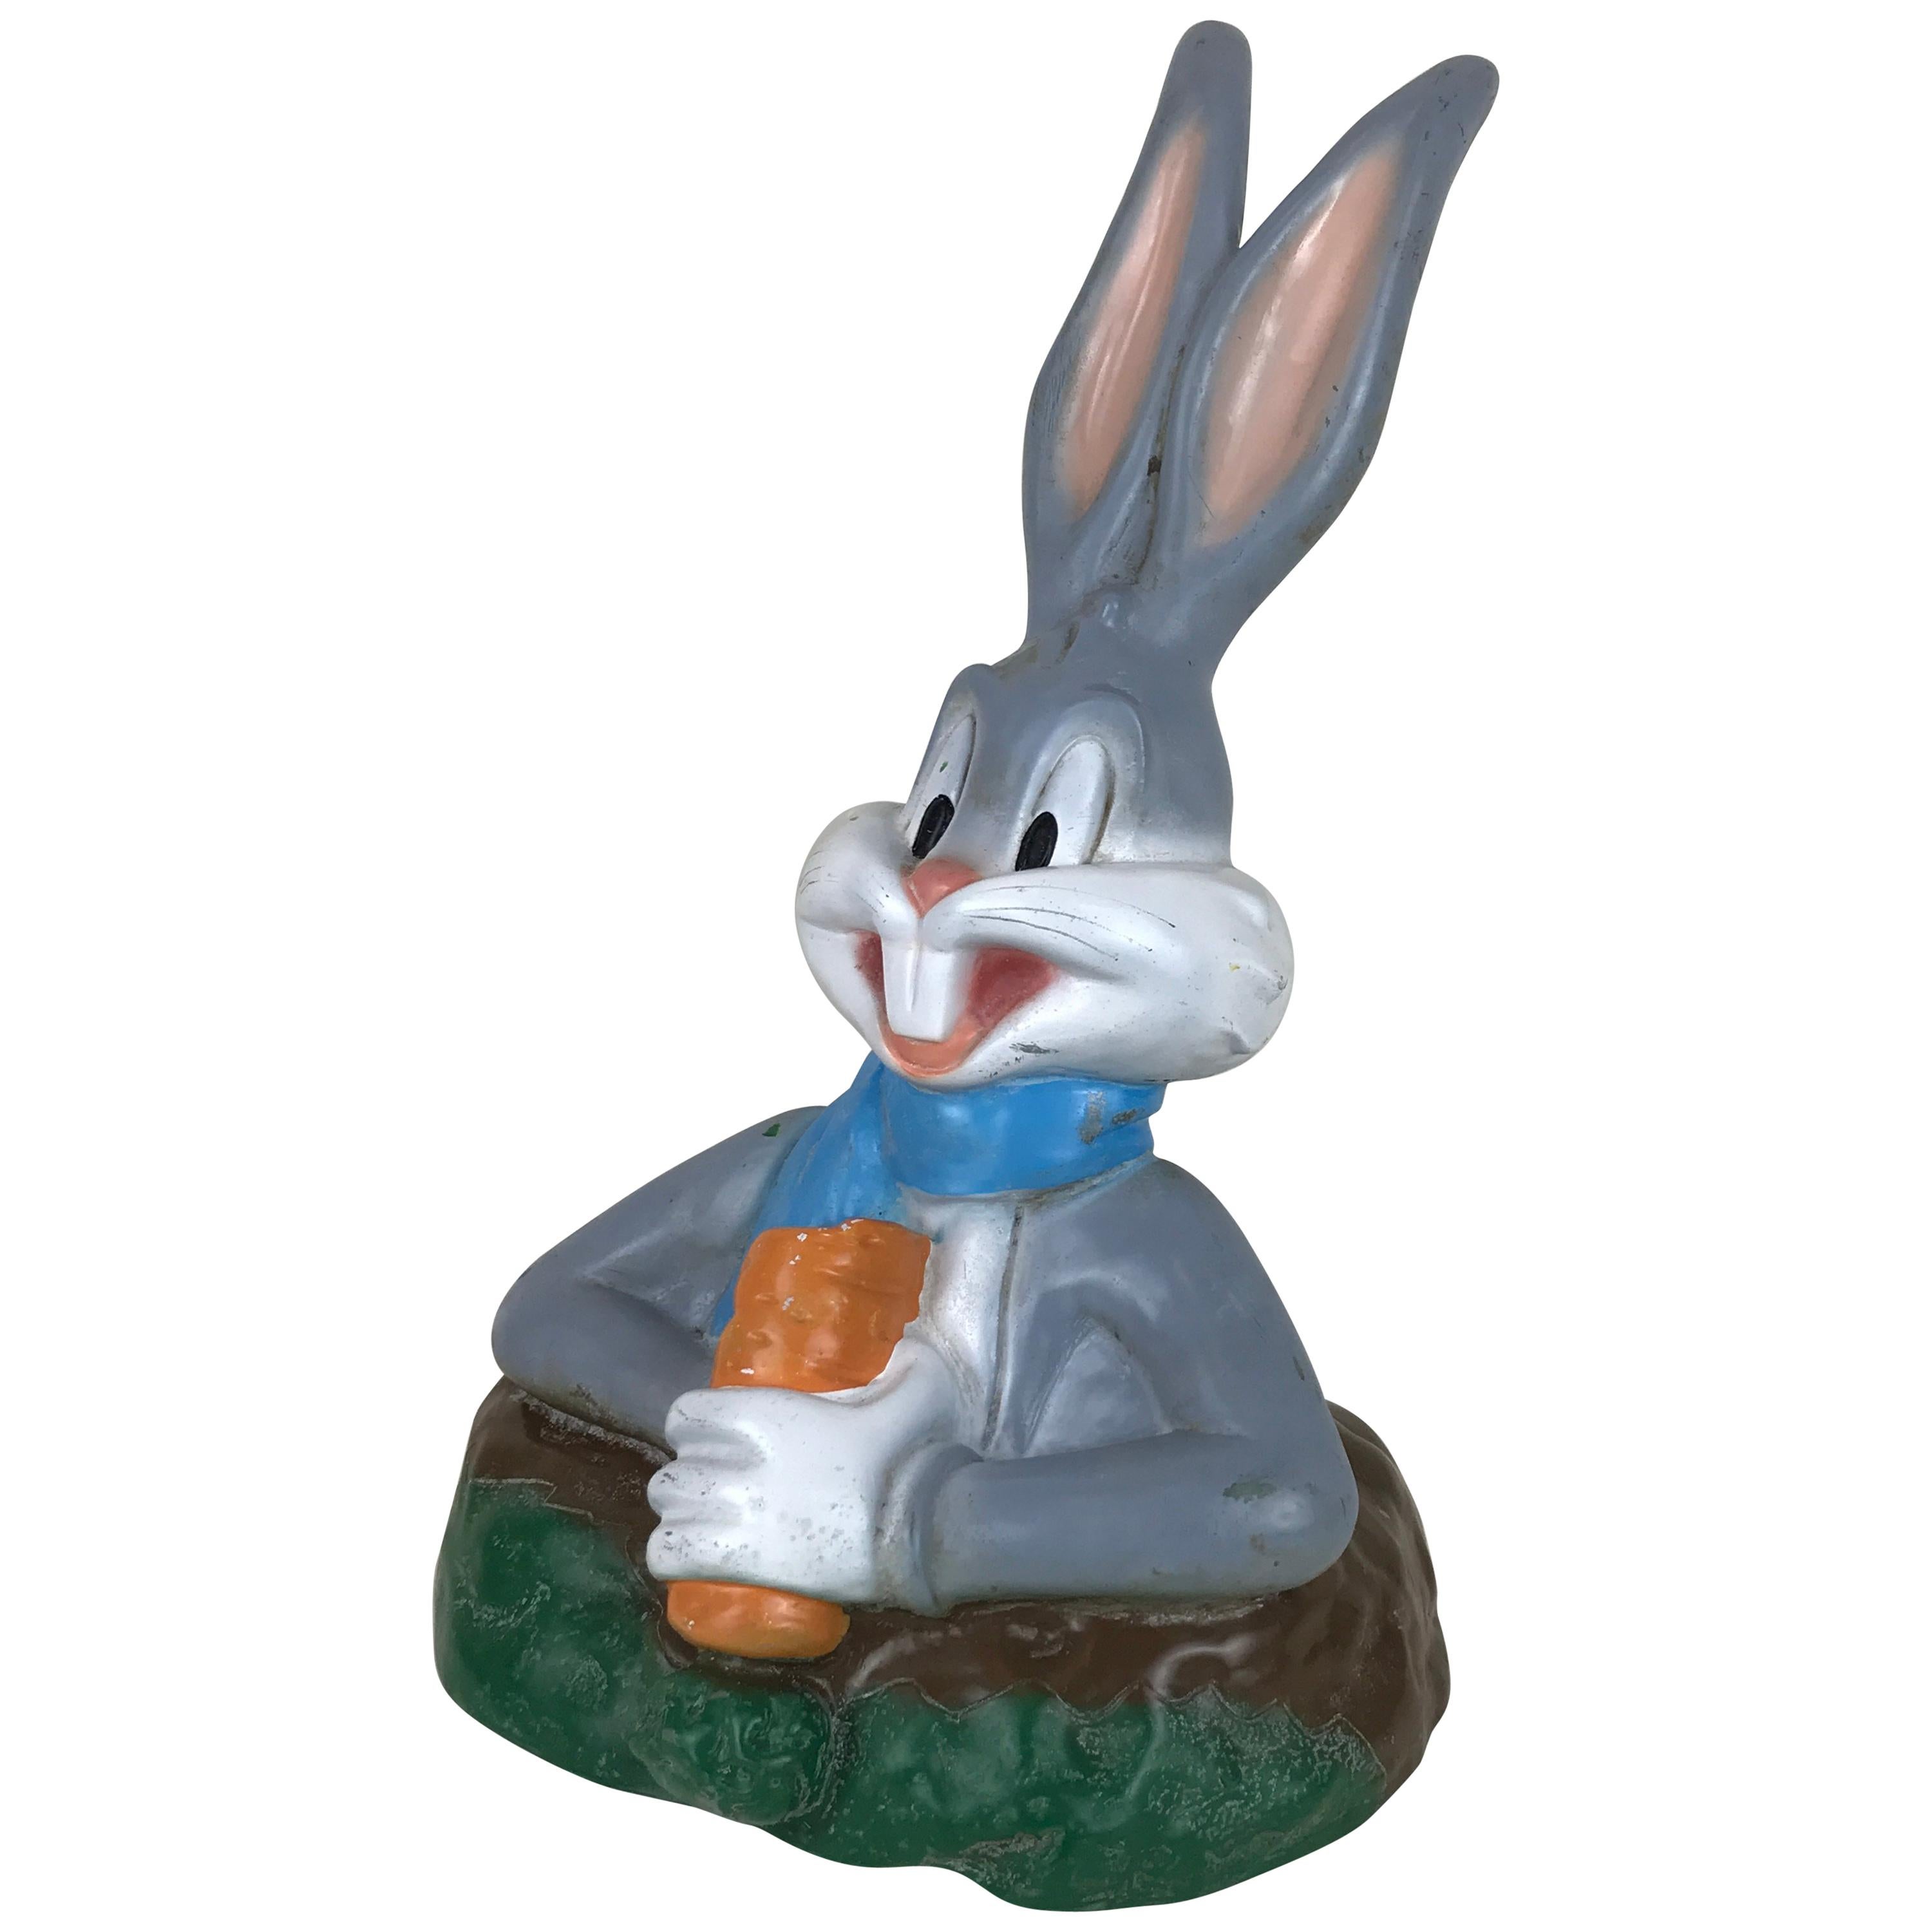 1990s Vintage Plastic Sculpture of Warner Bros' Bugs Bunny Eating a Carrot  For Sale